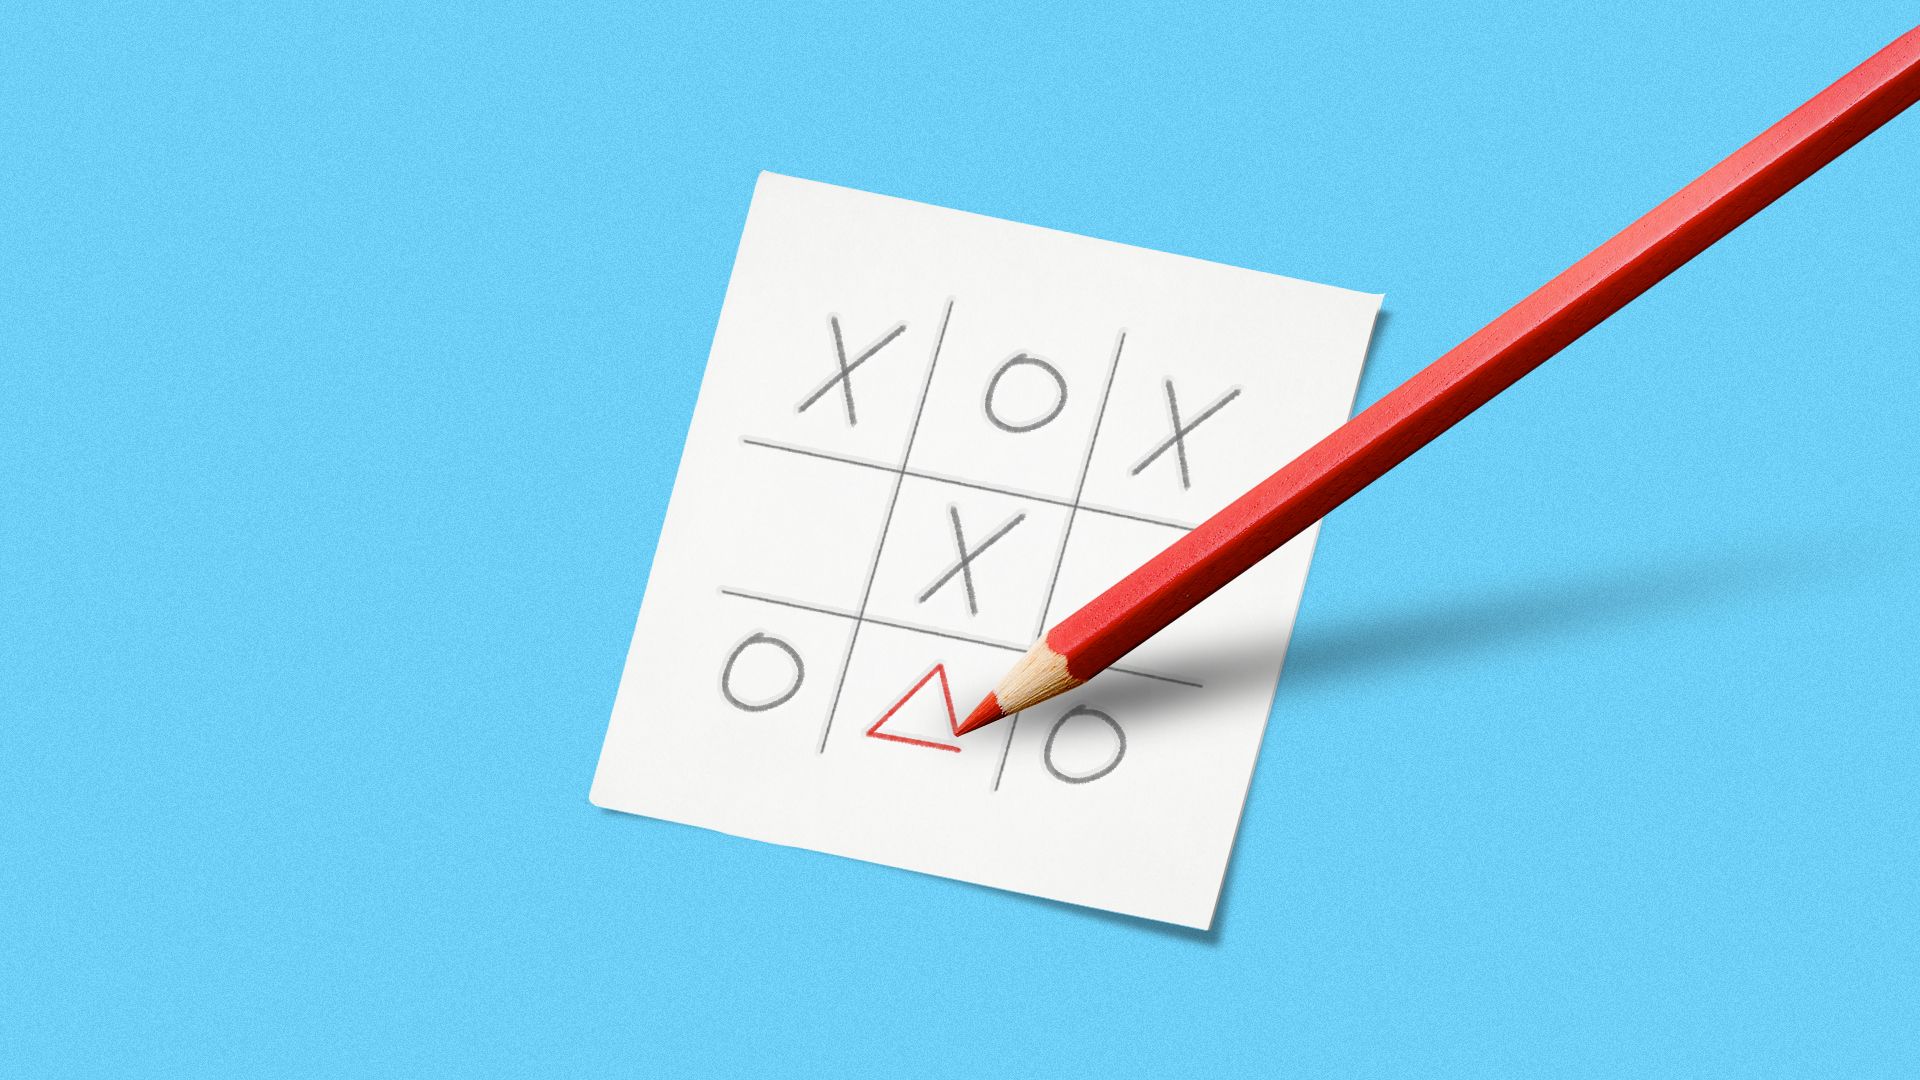 Illustration of a tic-tac-toe game with a pencil drawing a triangle in the grid. 